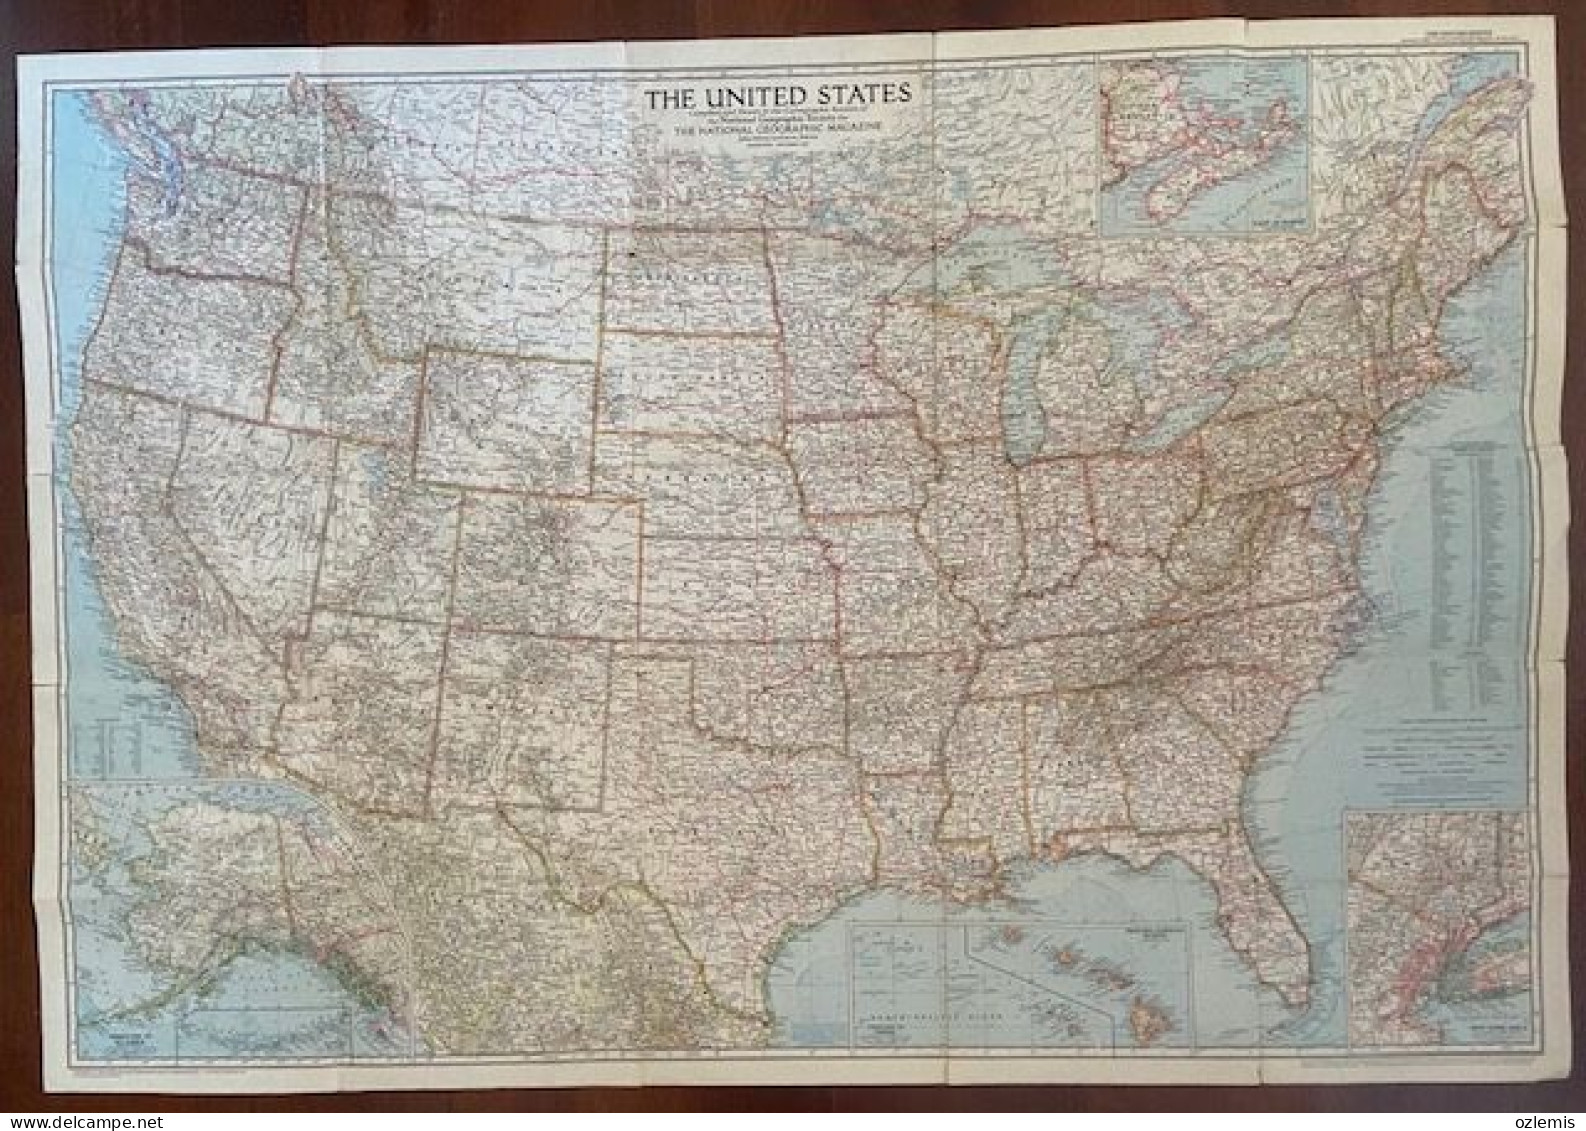 THE UNITED STATES , ,THE NATIONAL GEOGRAPHIC MAGAZINE ,1956 ,MAP - Atlas, Cartes